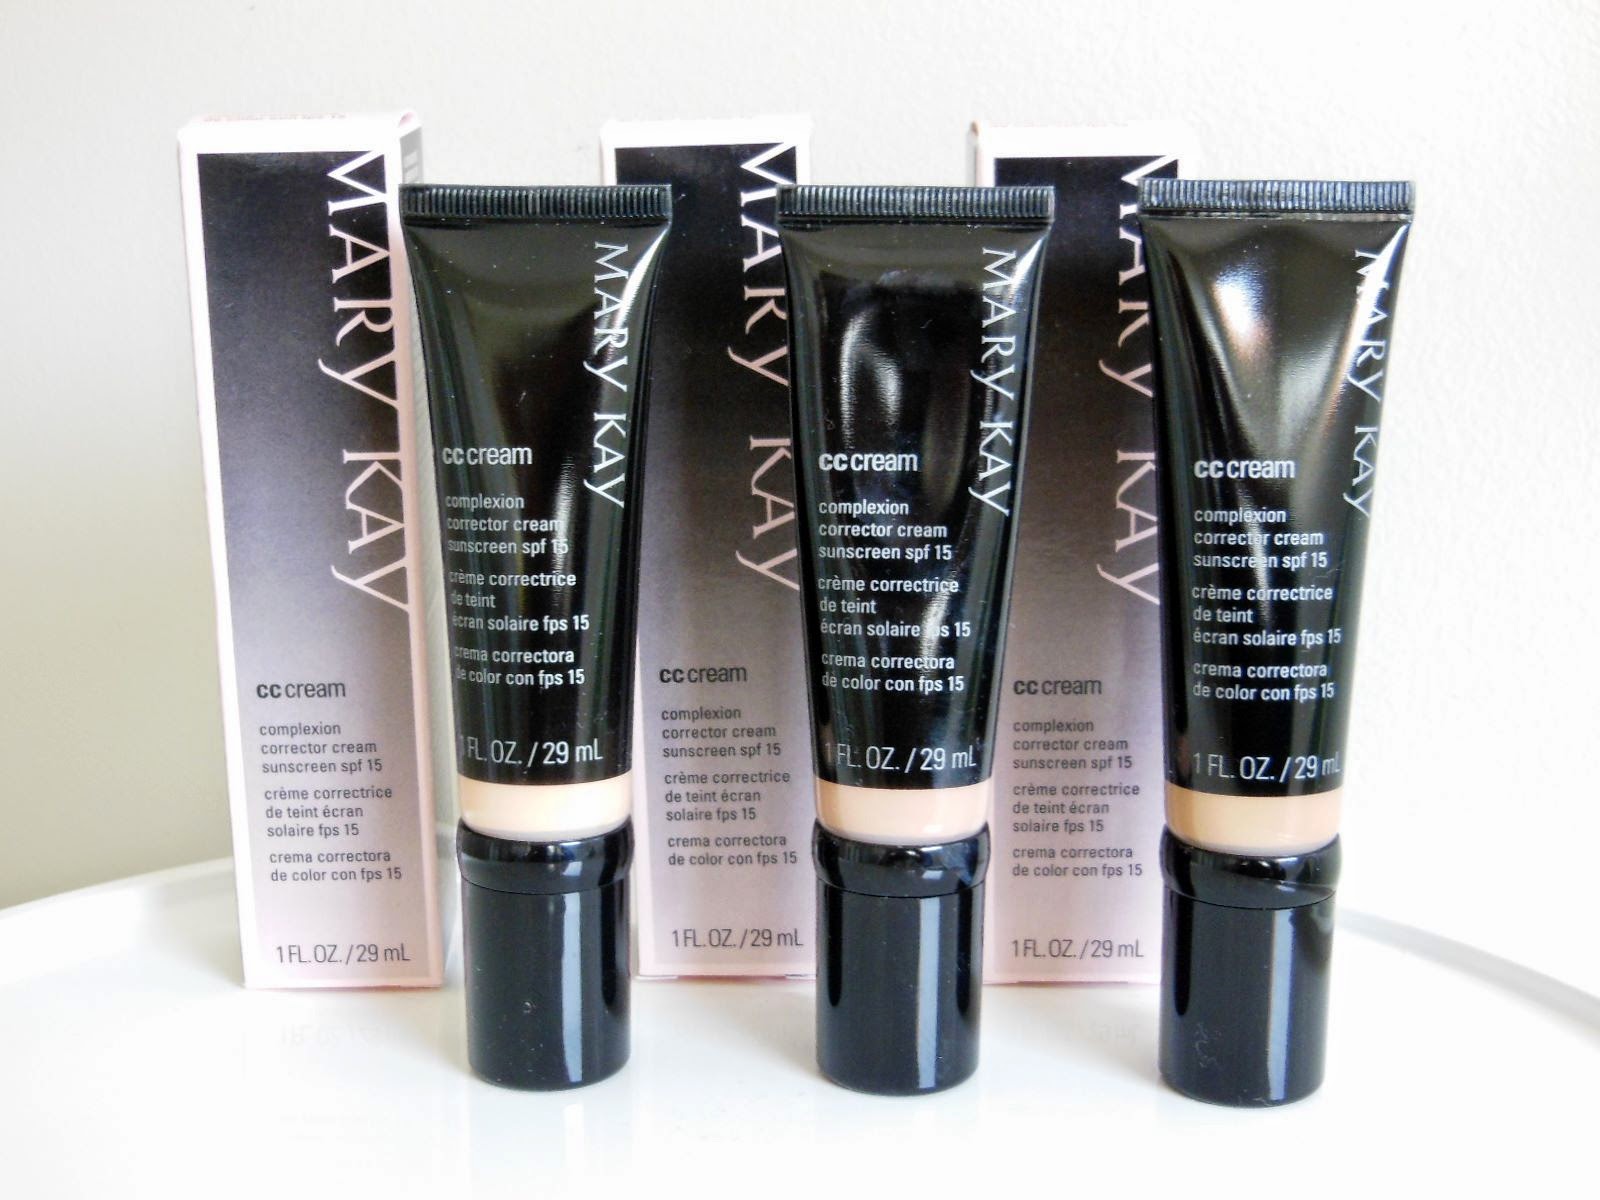 Product review: mary kay cc cream.
